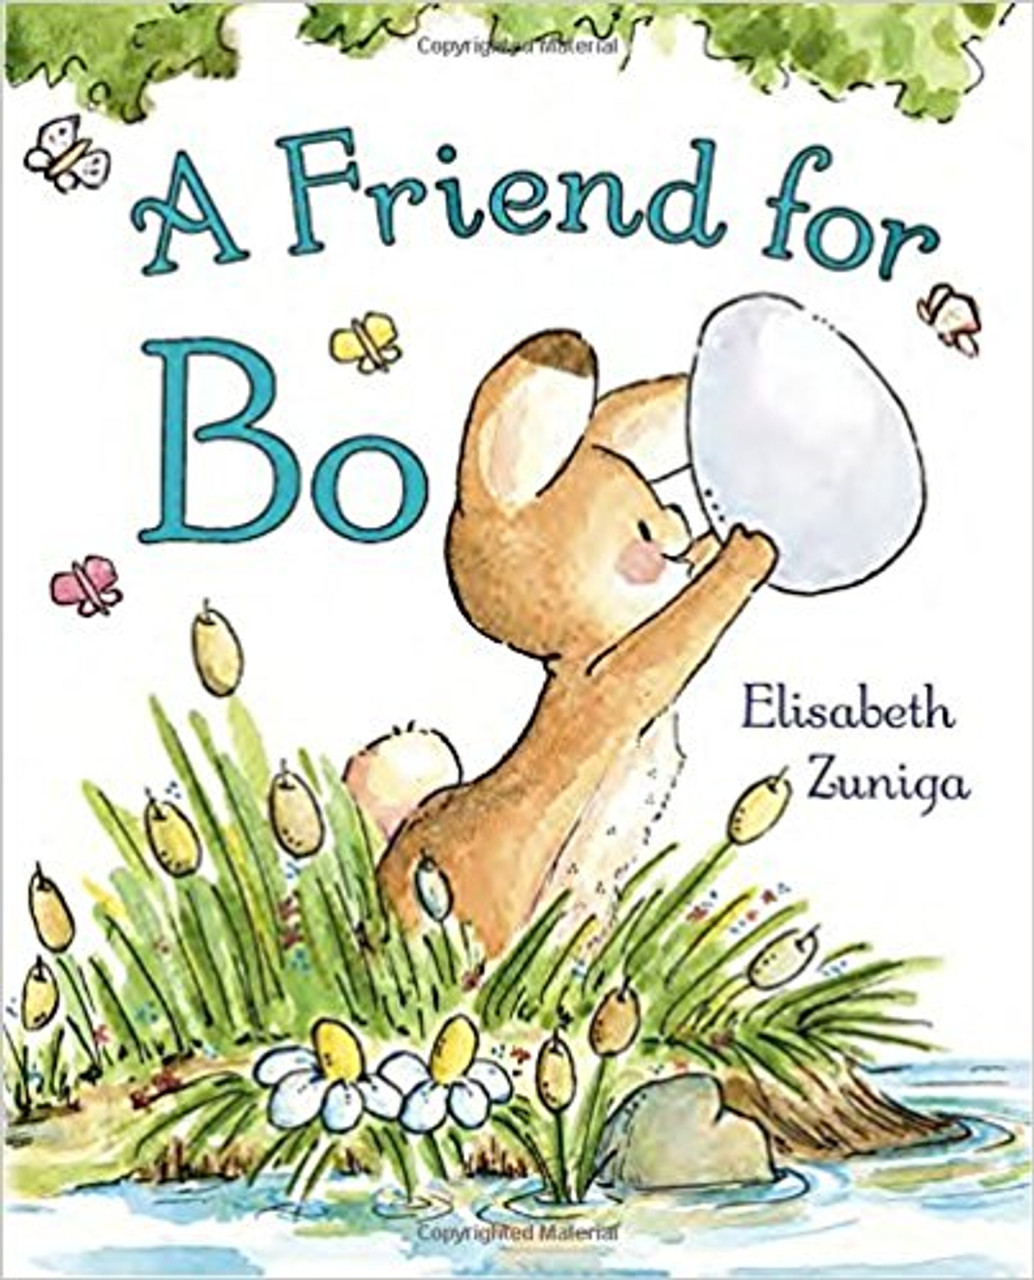 Bo is lonely. So he sets out to find a new friend. And that new friend just happens to be an egg